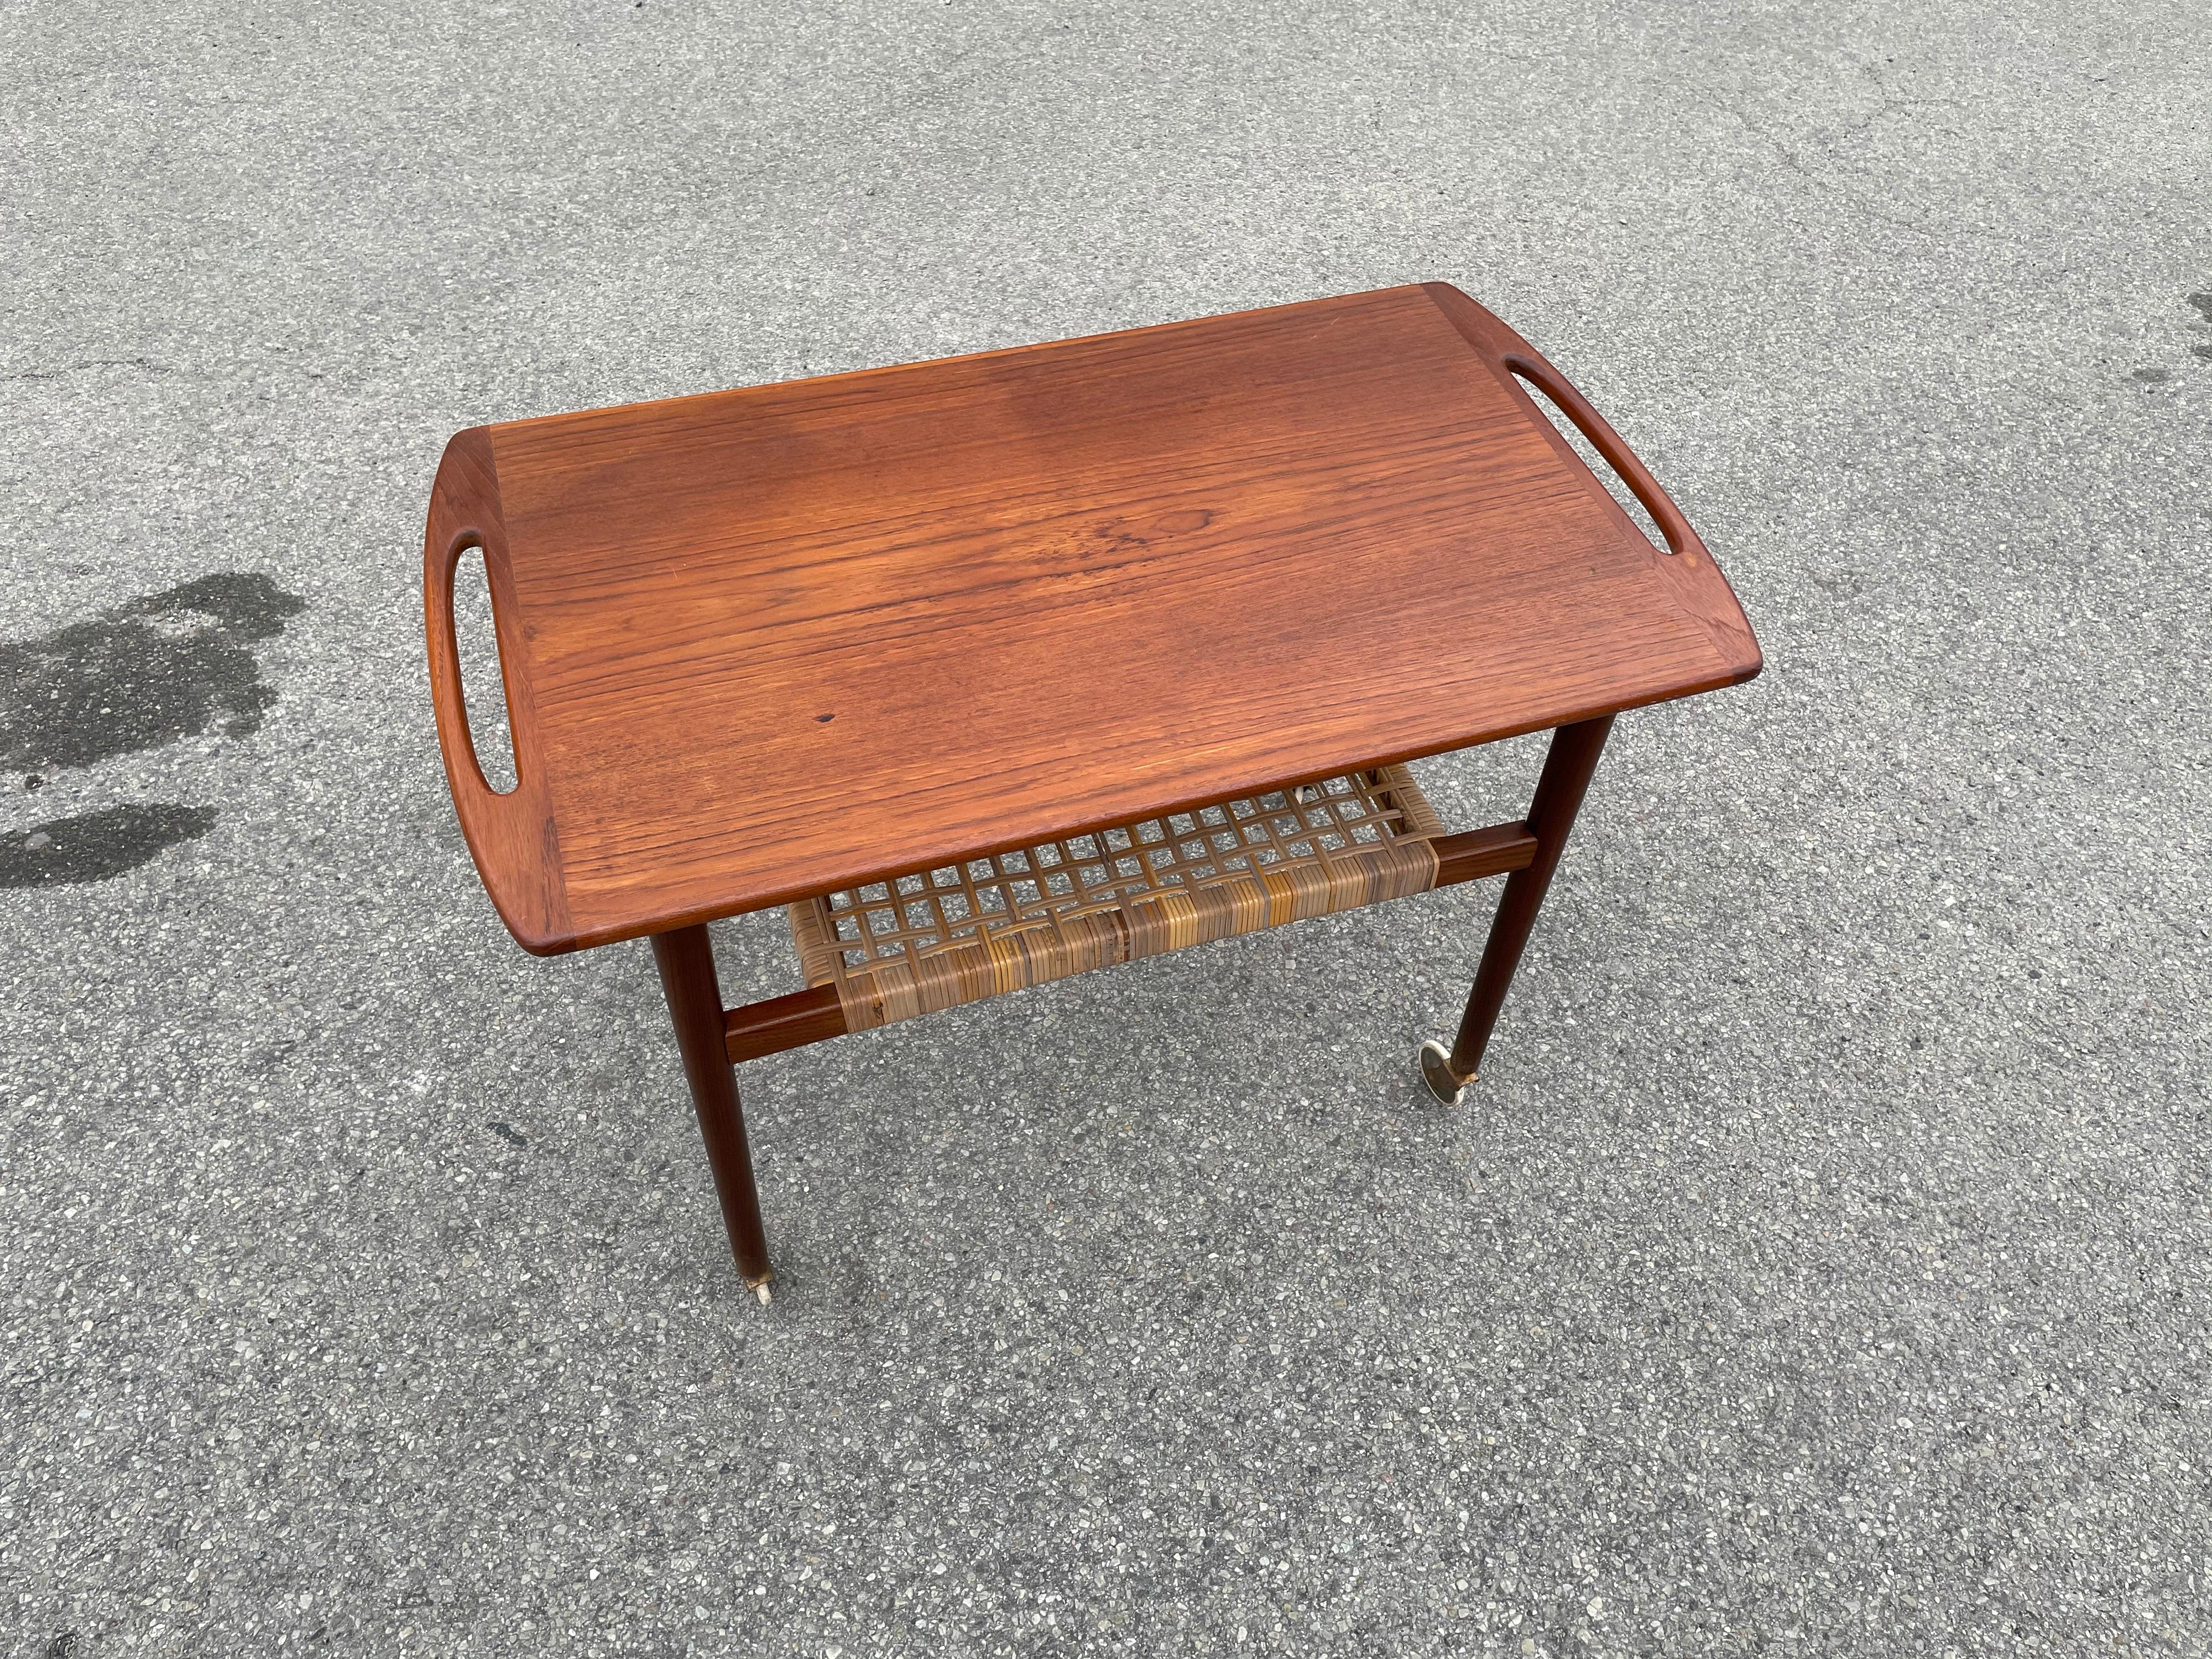 Vintage Danish teak serving trolley in teak and cane. Very slim and elegant design. Many uses as for an example a serving trolley, bar cart, side table or end table.
Good vintage condition, no structural issues.